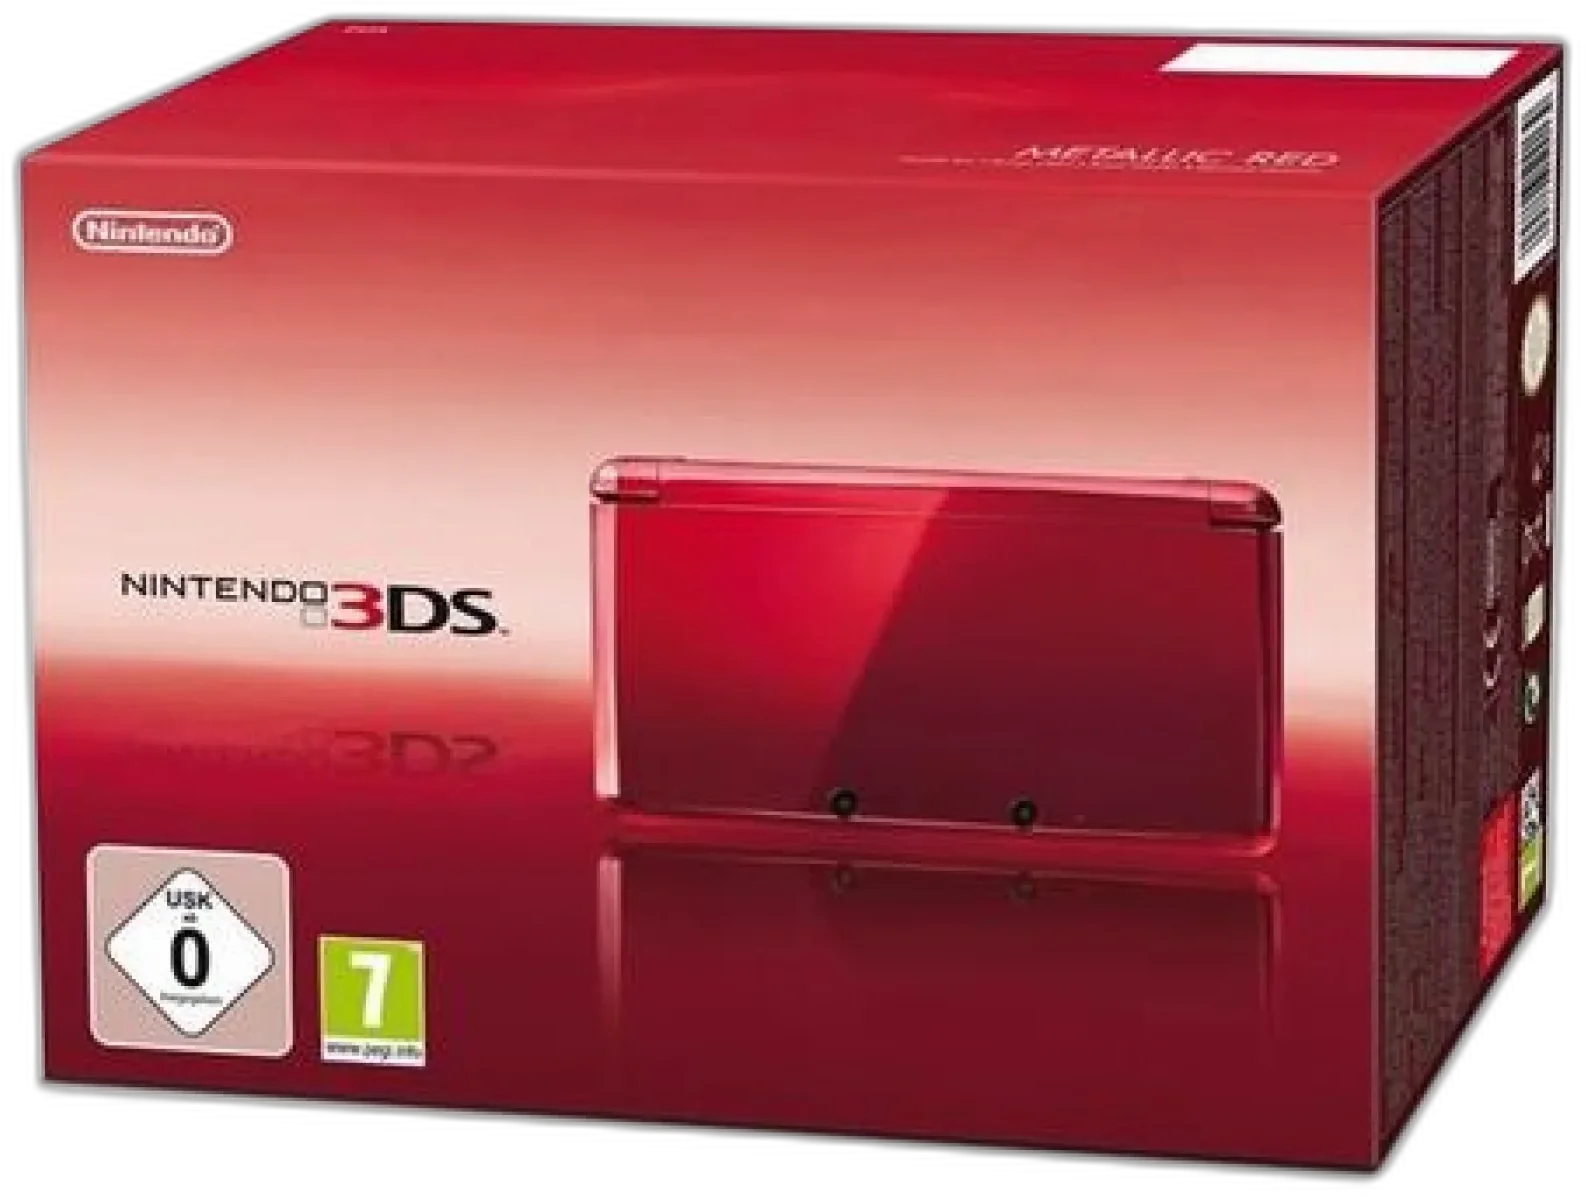  Nintendo 3DS Metallic Red Console [NA]